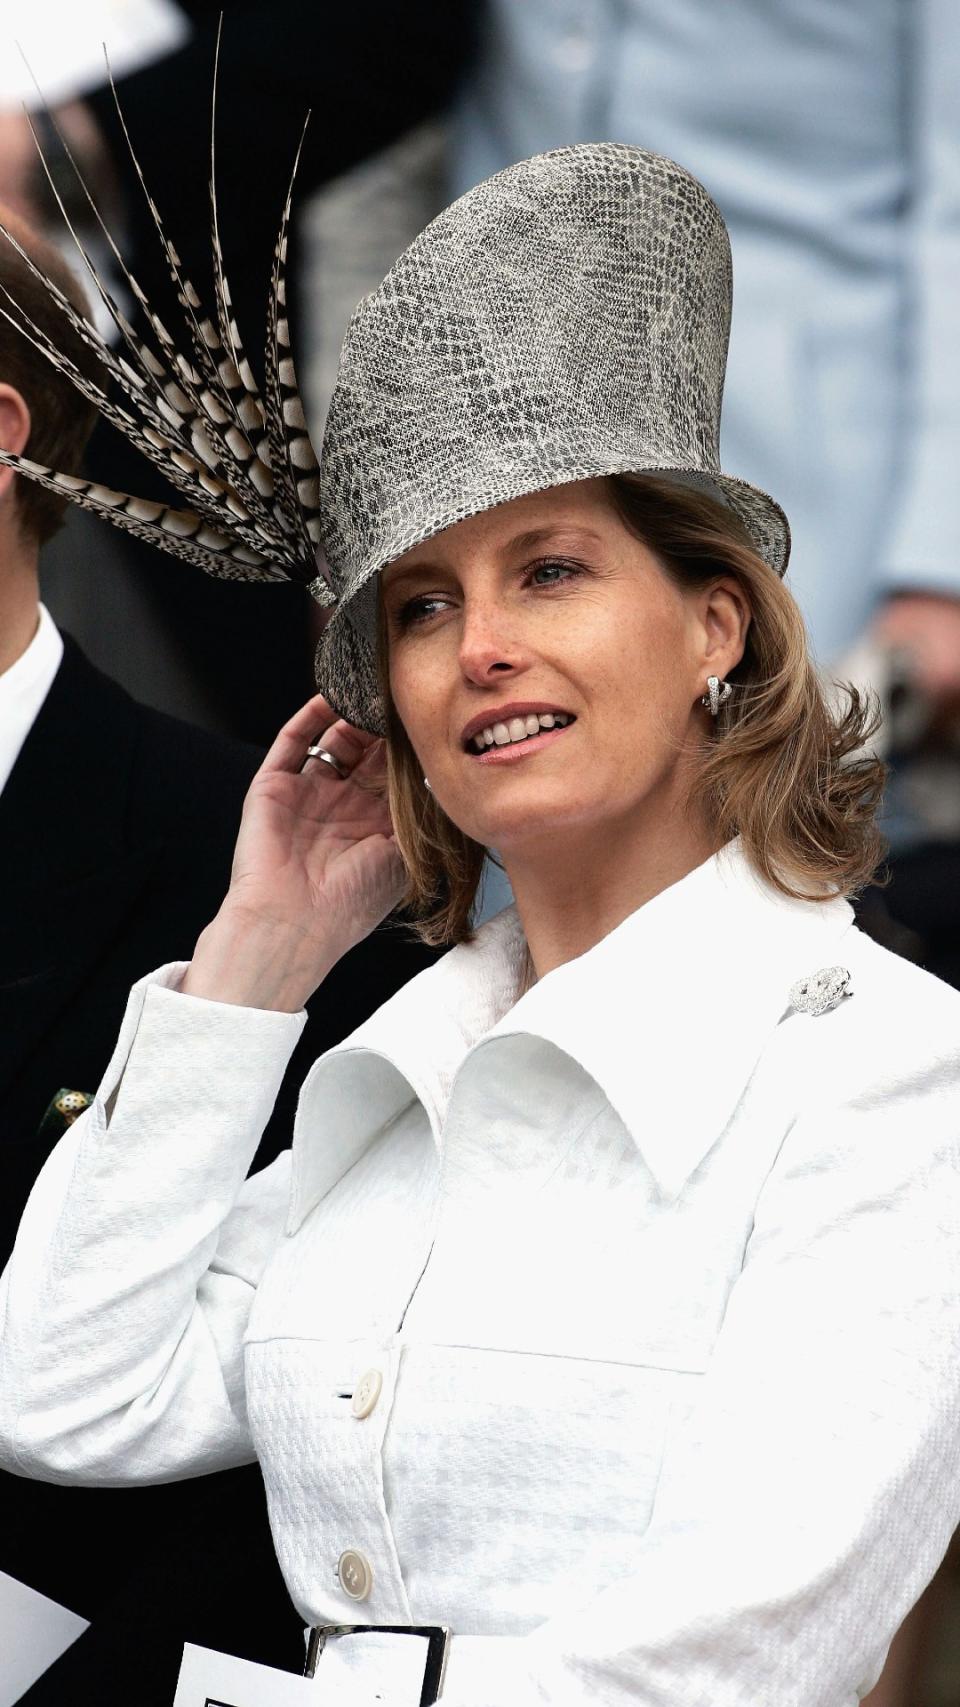 <p> At the wedding of the then Prince Charles and Camilla in 2005, Duchess Sophie wore an intriguing shapely snakeskin hat complete with a plume of feathers. It cemented Sophie as one to watch when it came to fashion, showcasing that she had her own style and wasn't afraid to mix things up. </p>